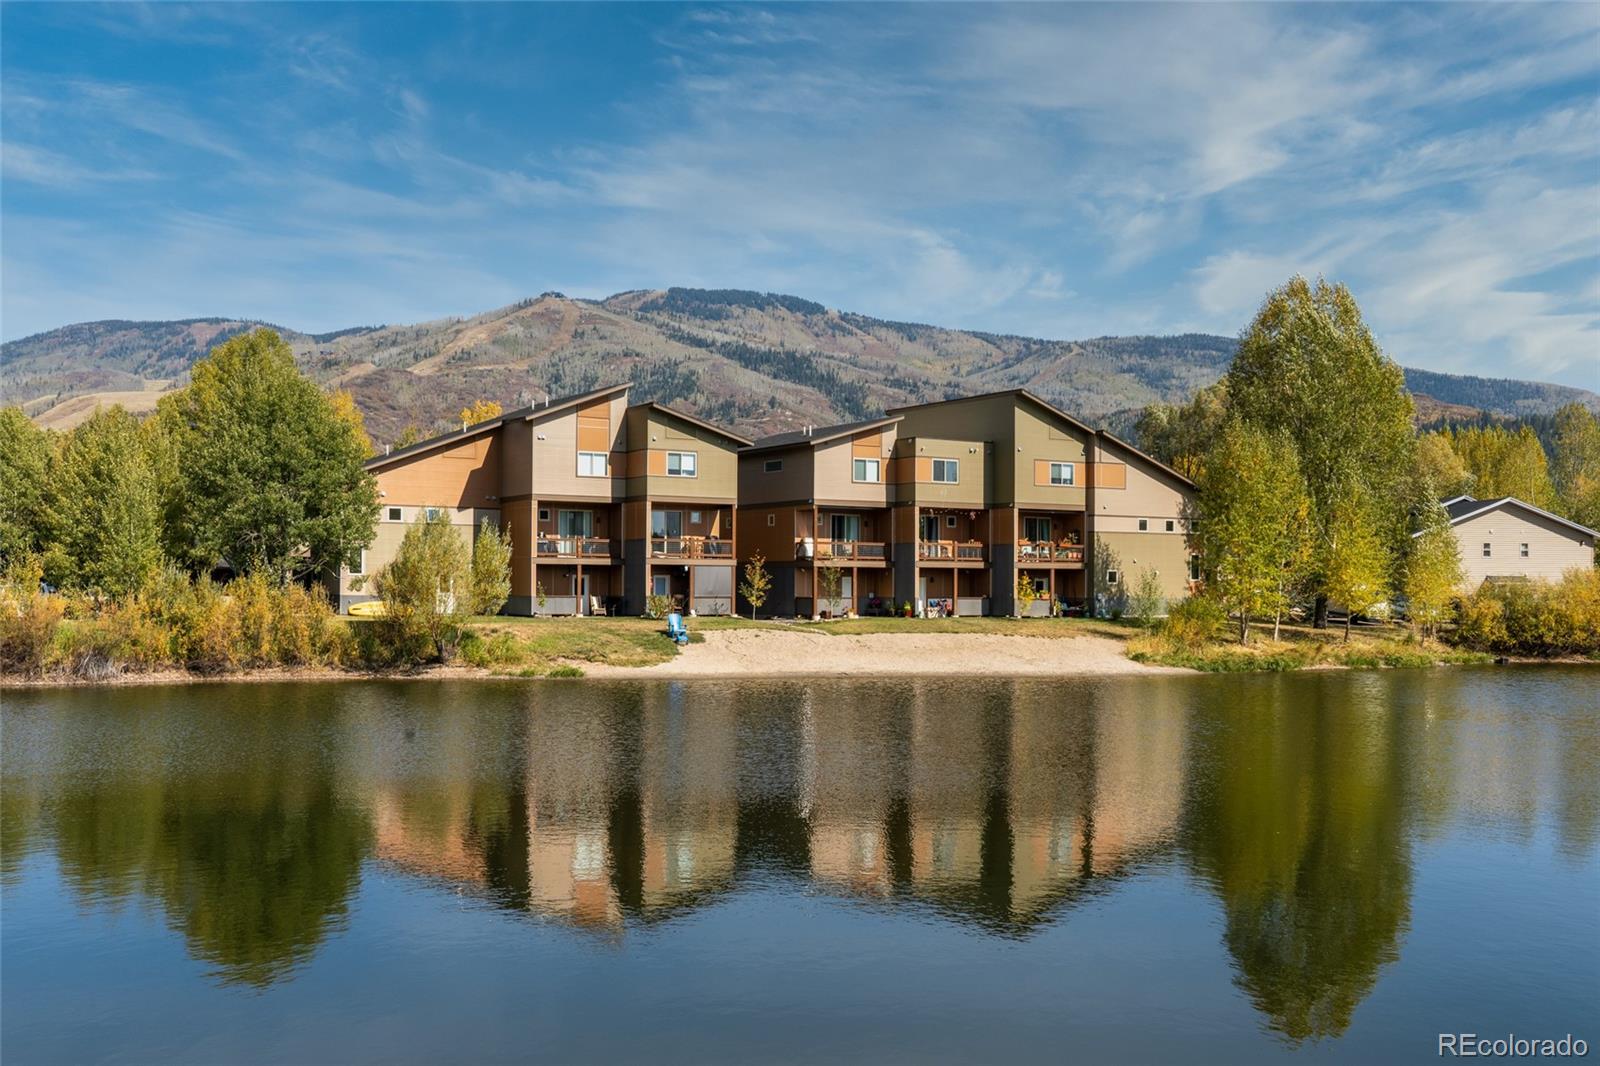 Sold 831 Weiss Drive, #4, Steamboat Springs, CO 80487, Mountain Area 2 Beds / 2 Full Baths / 1 Half Bath $649,000 photo